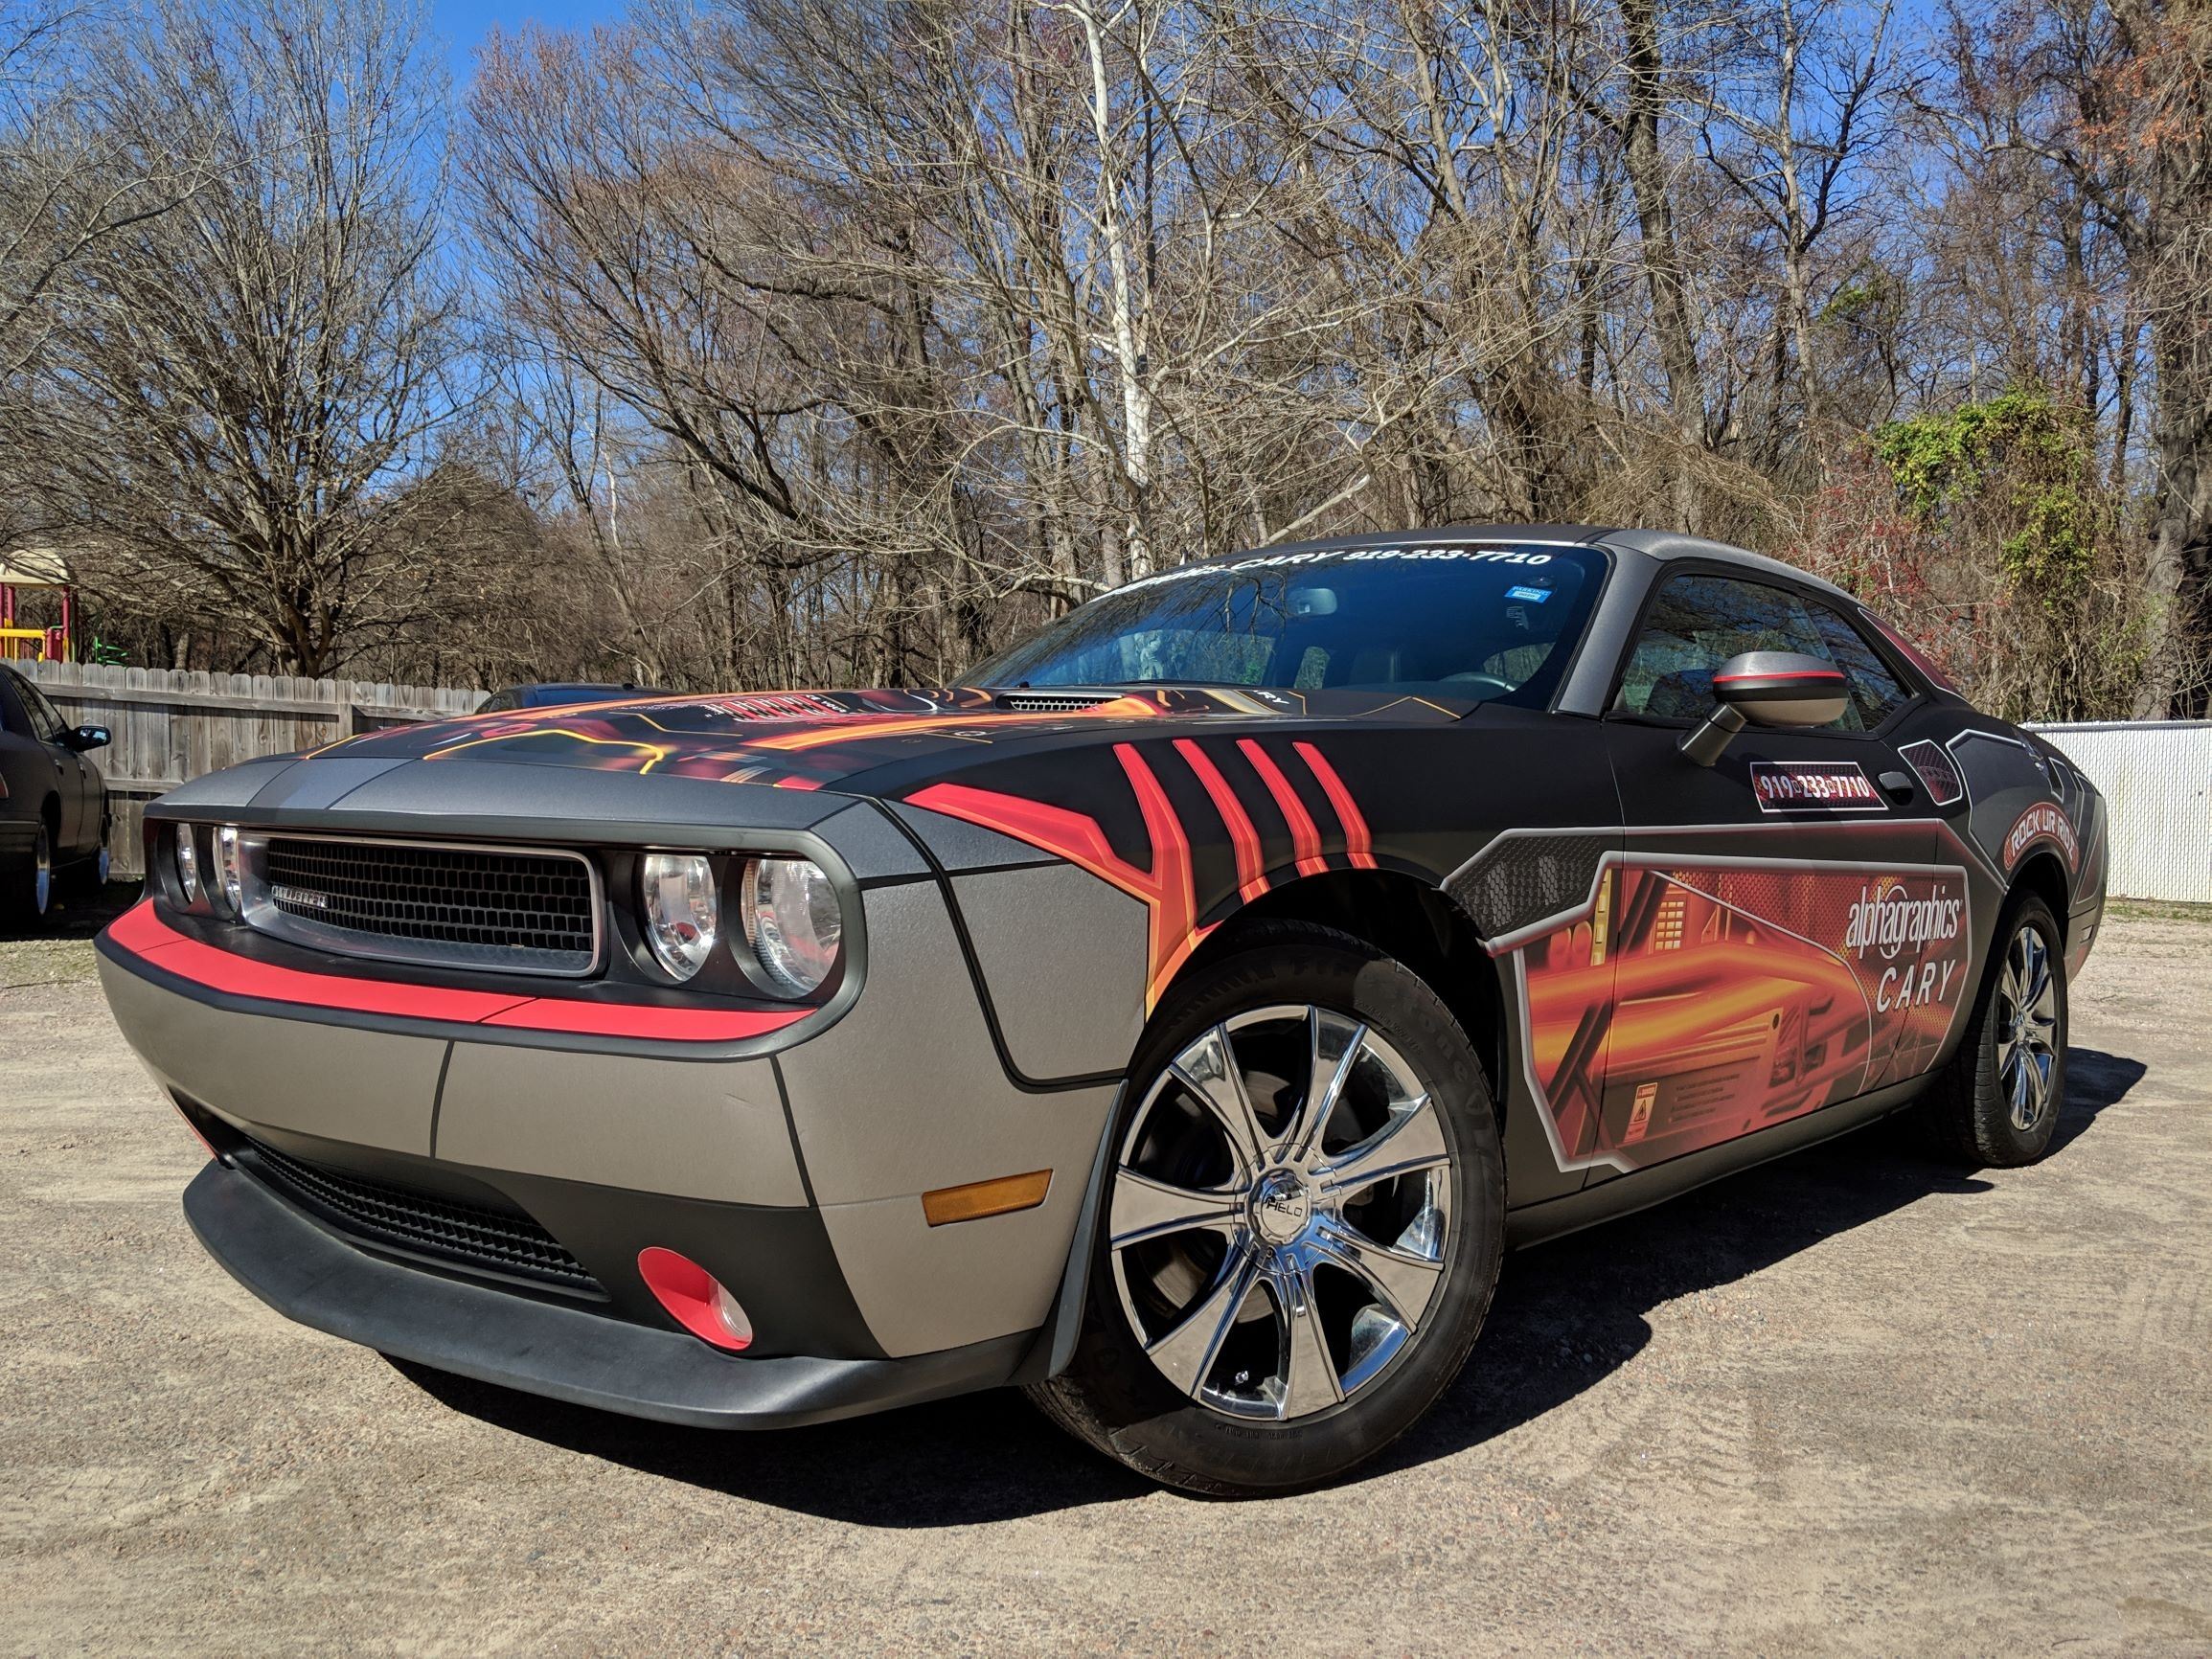 Dodge Challenger Wrapped by AlphaGraphics Cary